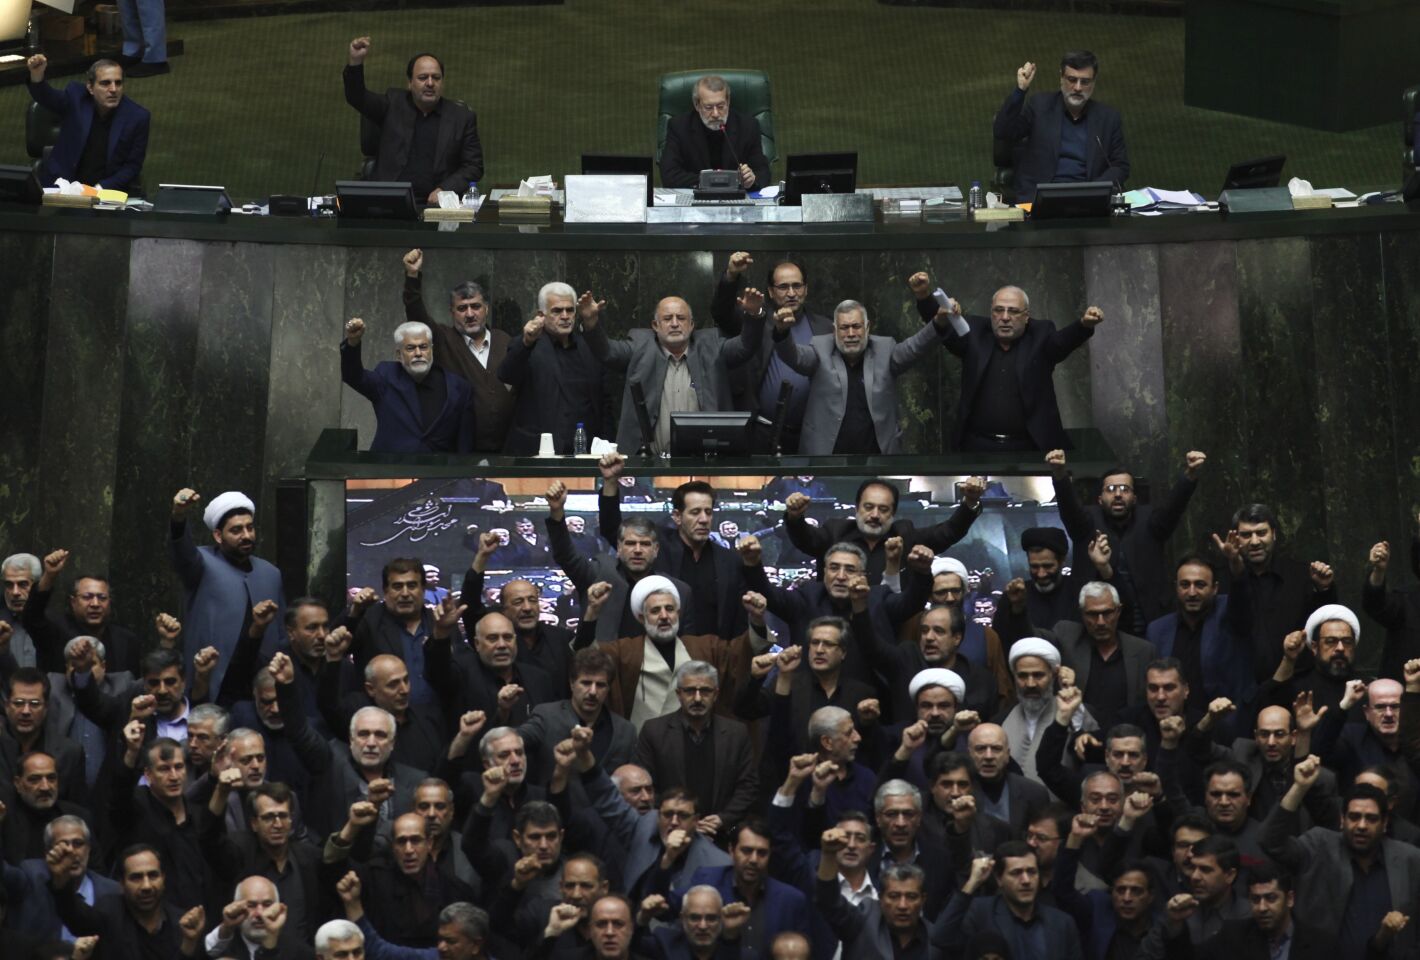 Iranian lawmakers chant anti-American and anti-Israeli slogans to protest against the U.S. killing of Iranian top general Qassem Suleimani, at the start of an open session of parliament in Tehran, Iran.